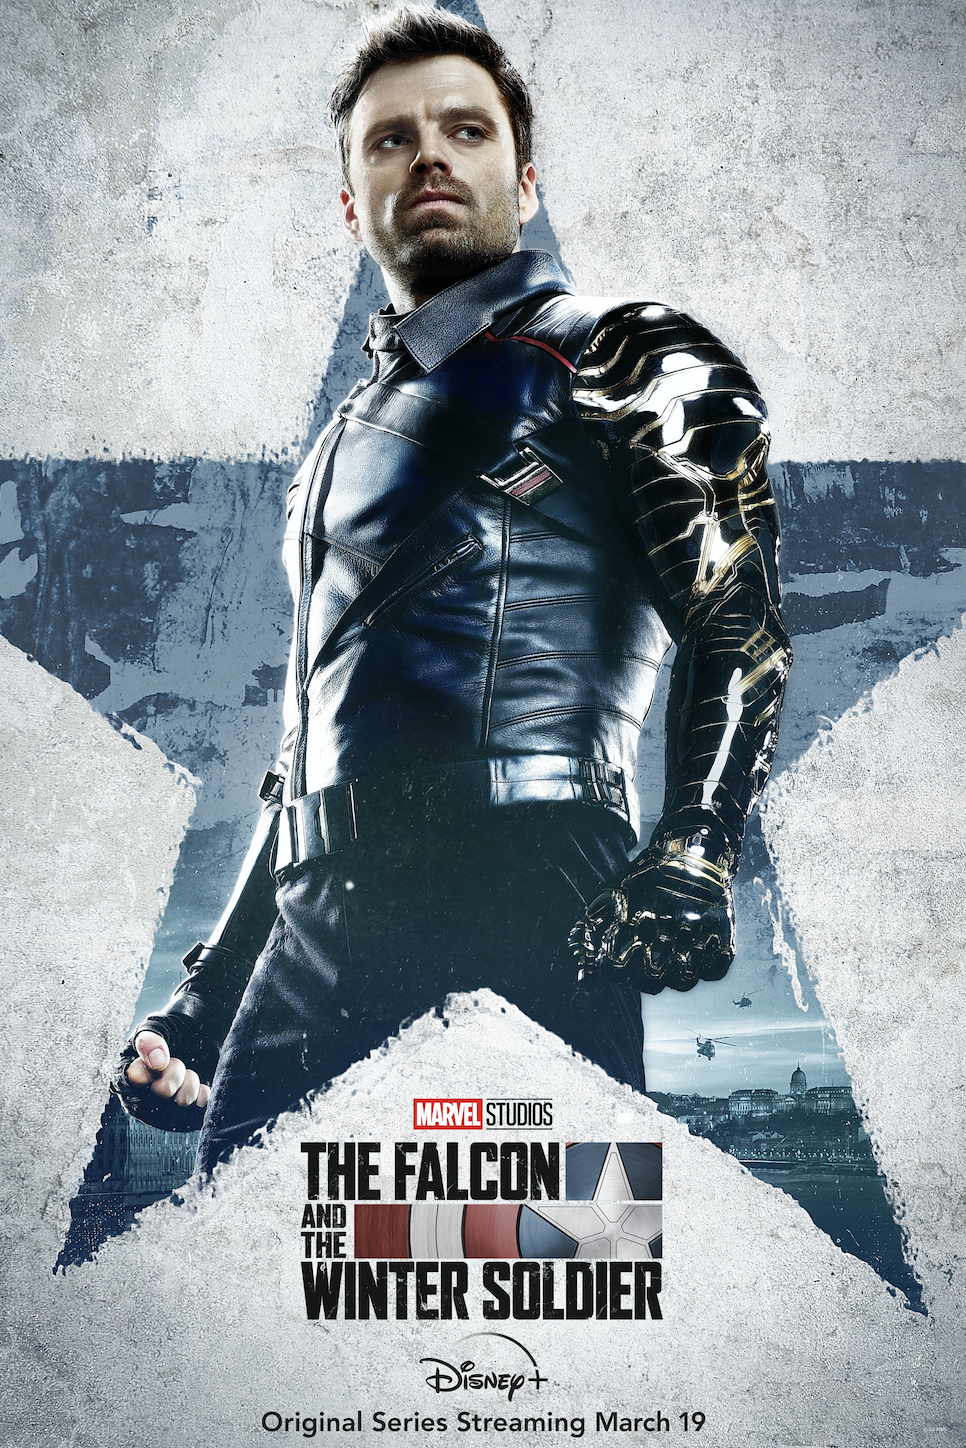 All new Falcon & the Winter Soldier Posters